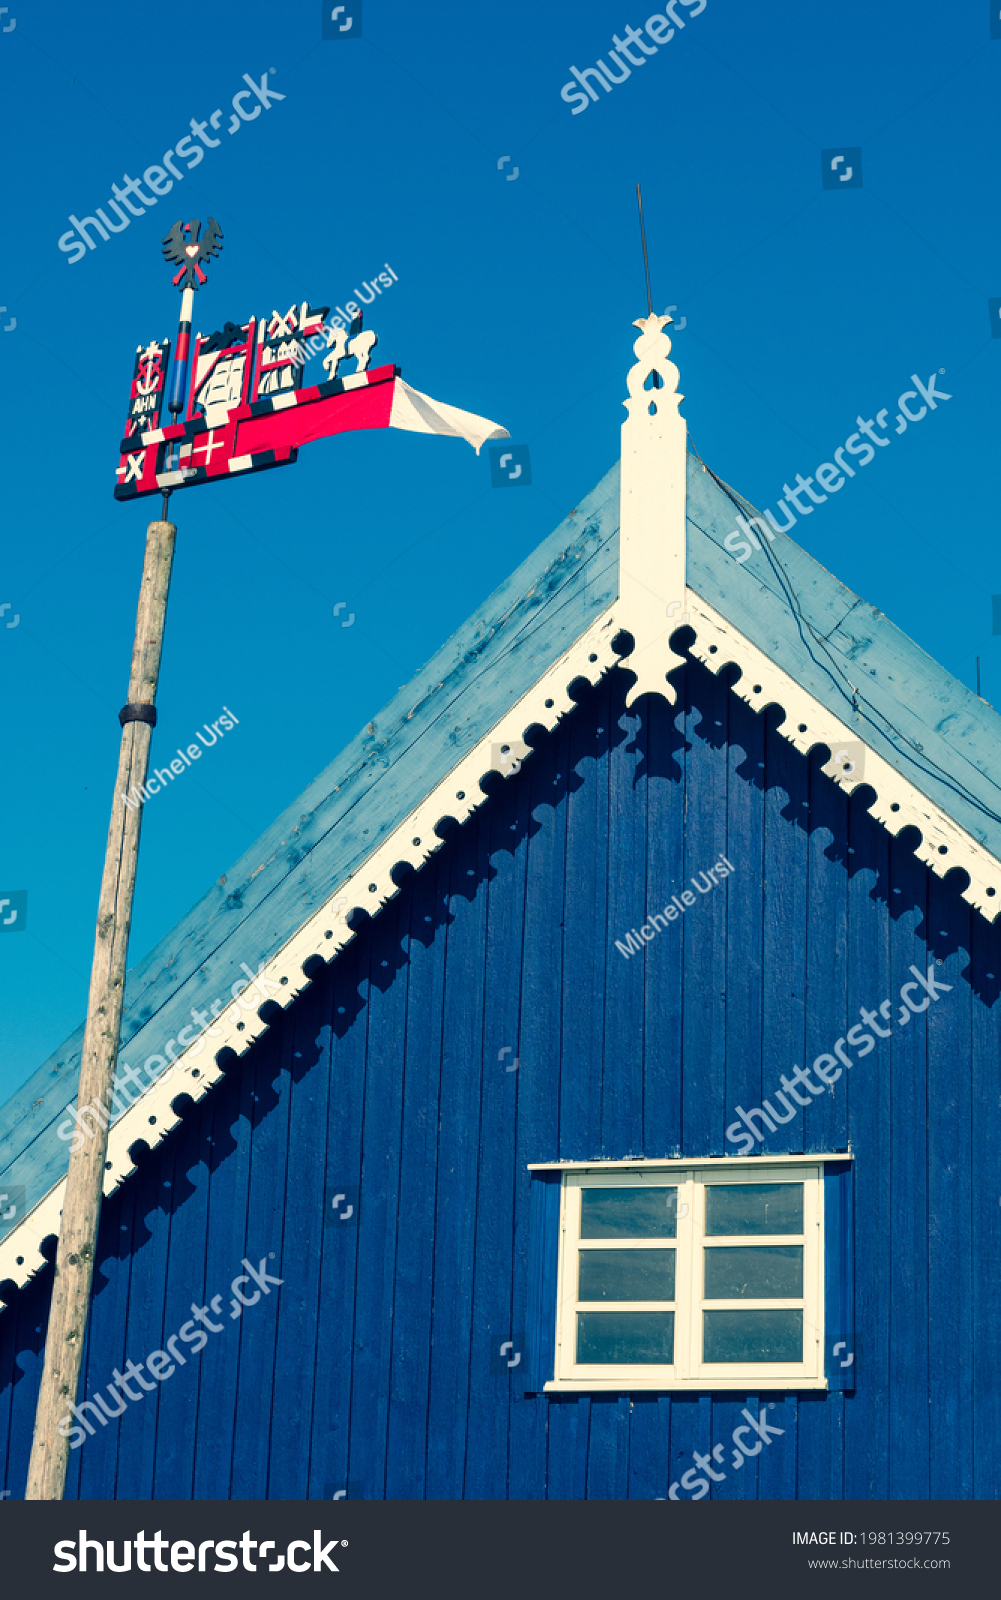 Beautiful colorful weathercock waving in the Curonian Spit in Nida fishermen's village, Lithuania, Europe with blue sky and roof of a wooden blue house with white window, vertical #1981399775